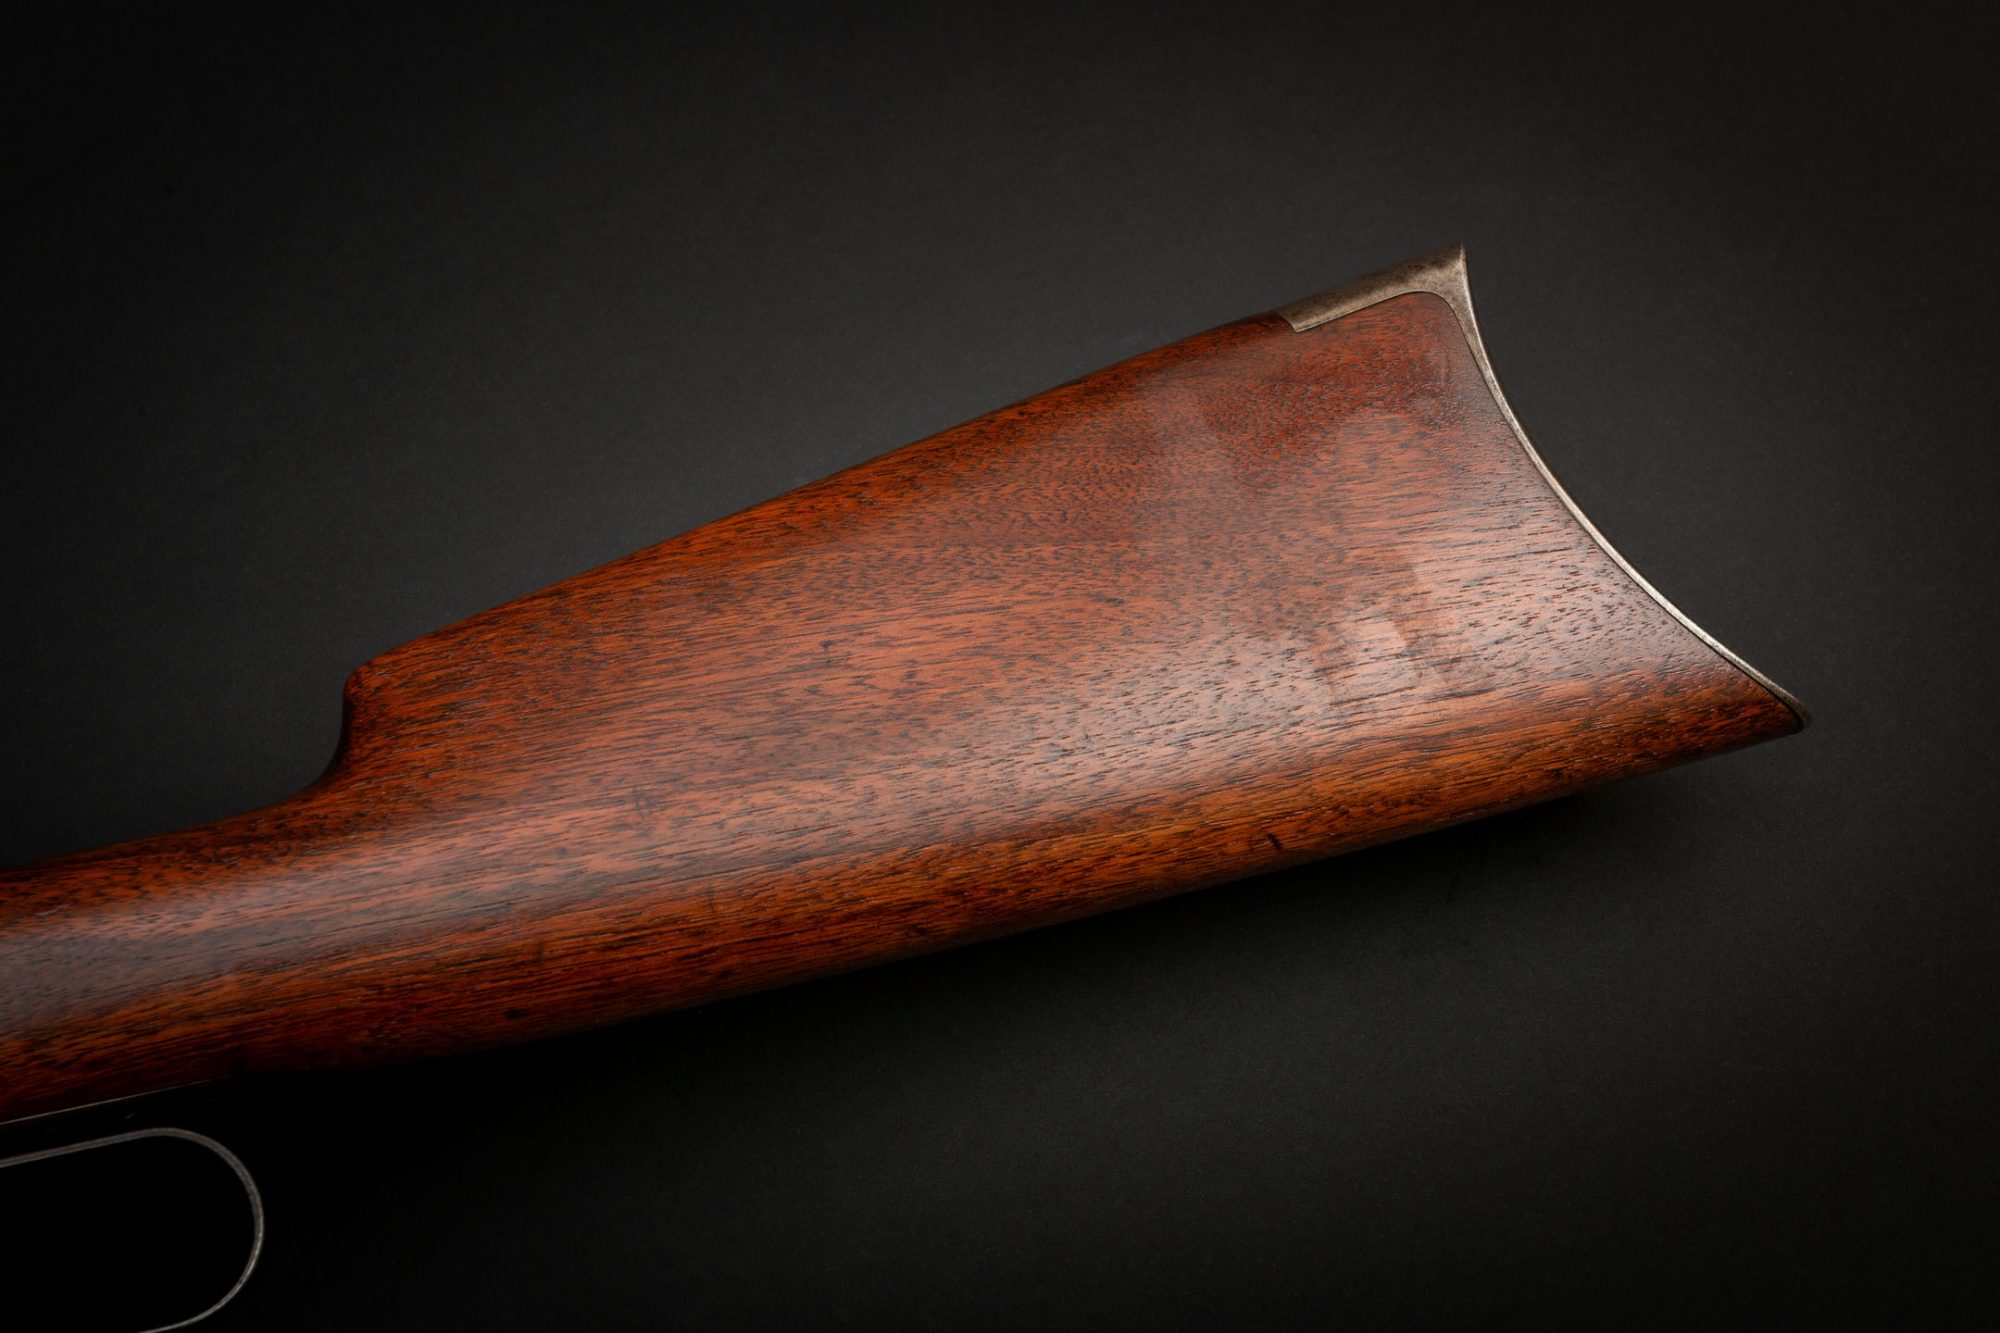 Winchester Model 1894 Takedown from 1905, for sale by Turnbull Restoration of Bloomfield, NY